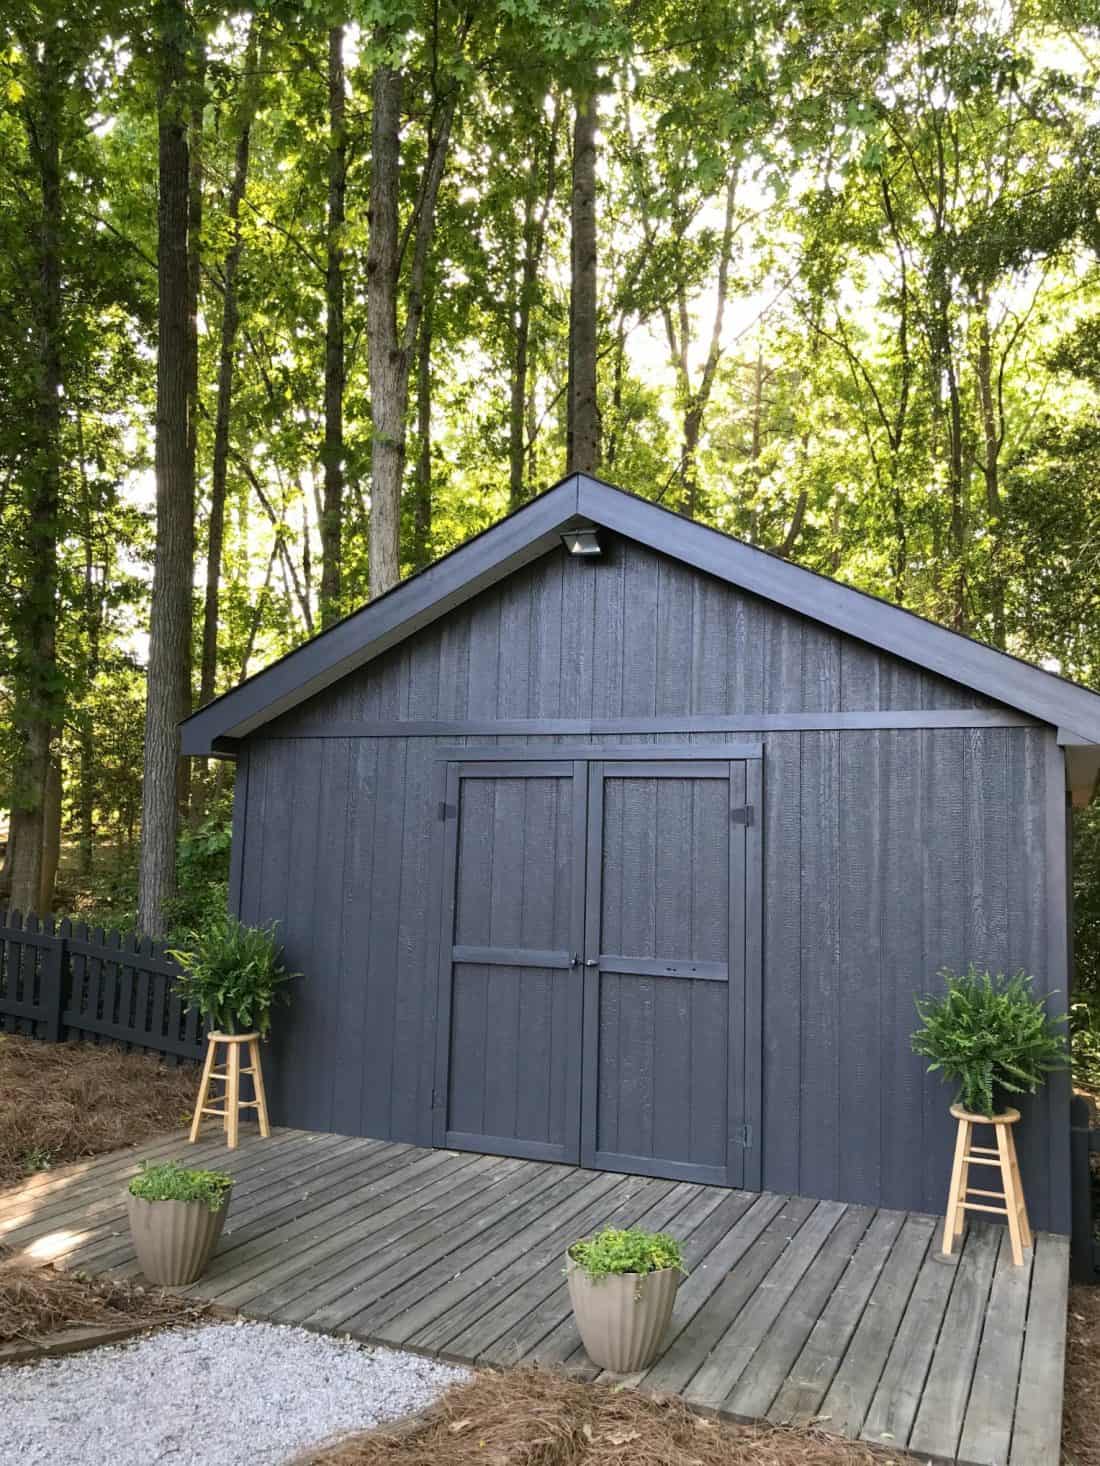 Painted Shed in Behr Cracked Pepper